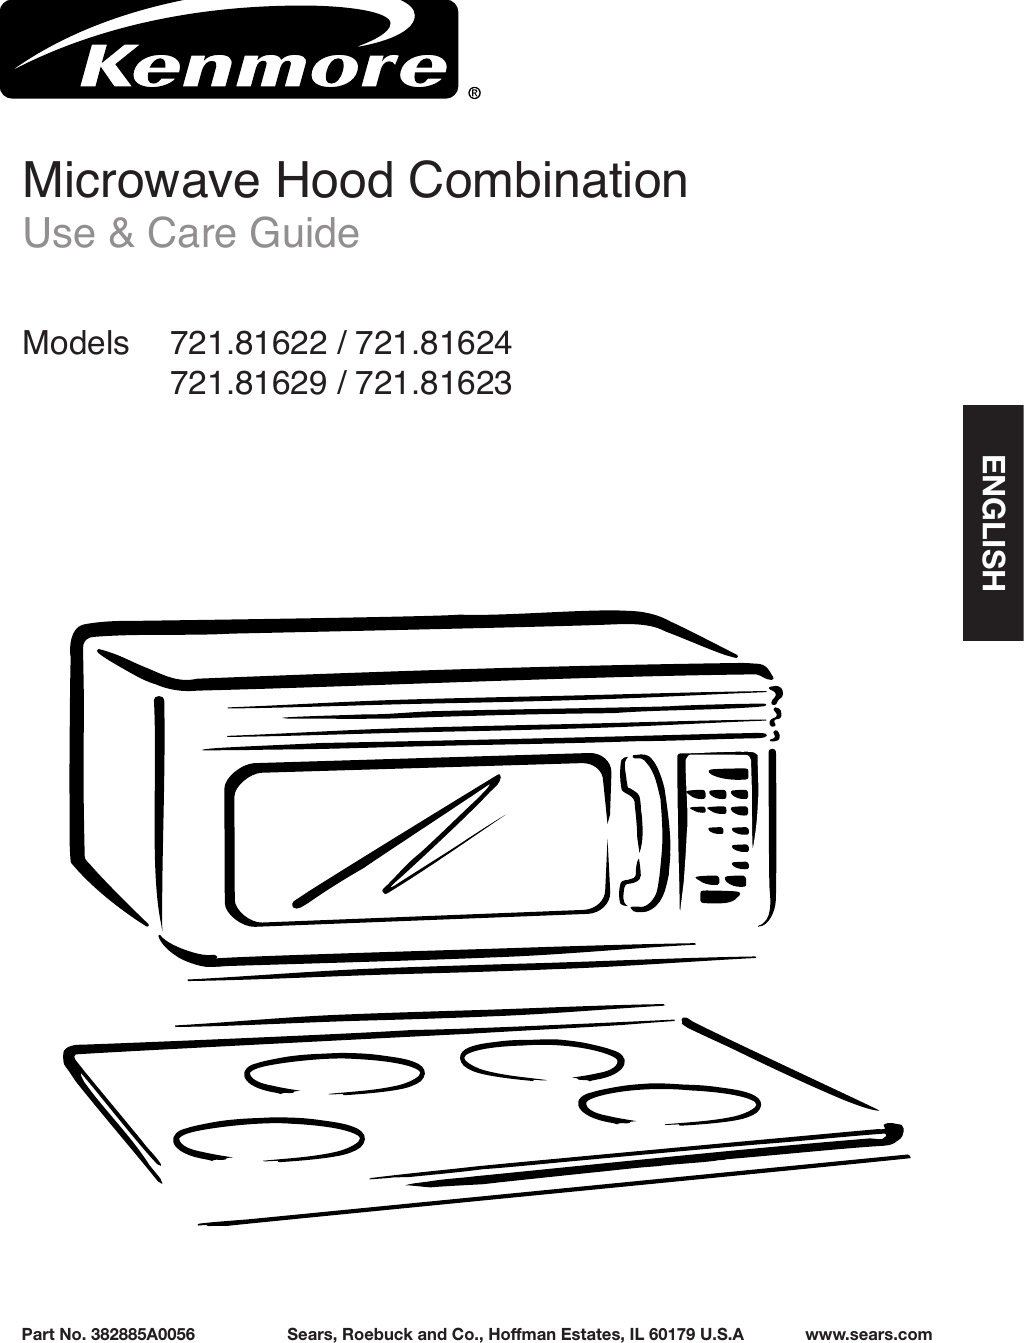 Microwave Hood CombinationUse &amp; Care GuideModels      721.81622 / 721.81624 721.81629 / 721.81623Part No. 382885A0056  Sears, Roebuck and Co., Hoffman Estates, IL 60179 U.S.A  www.sears.comENGLISH